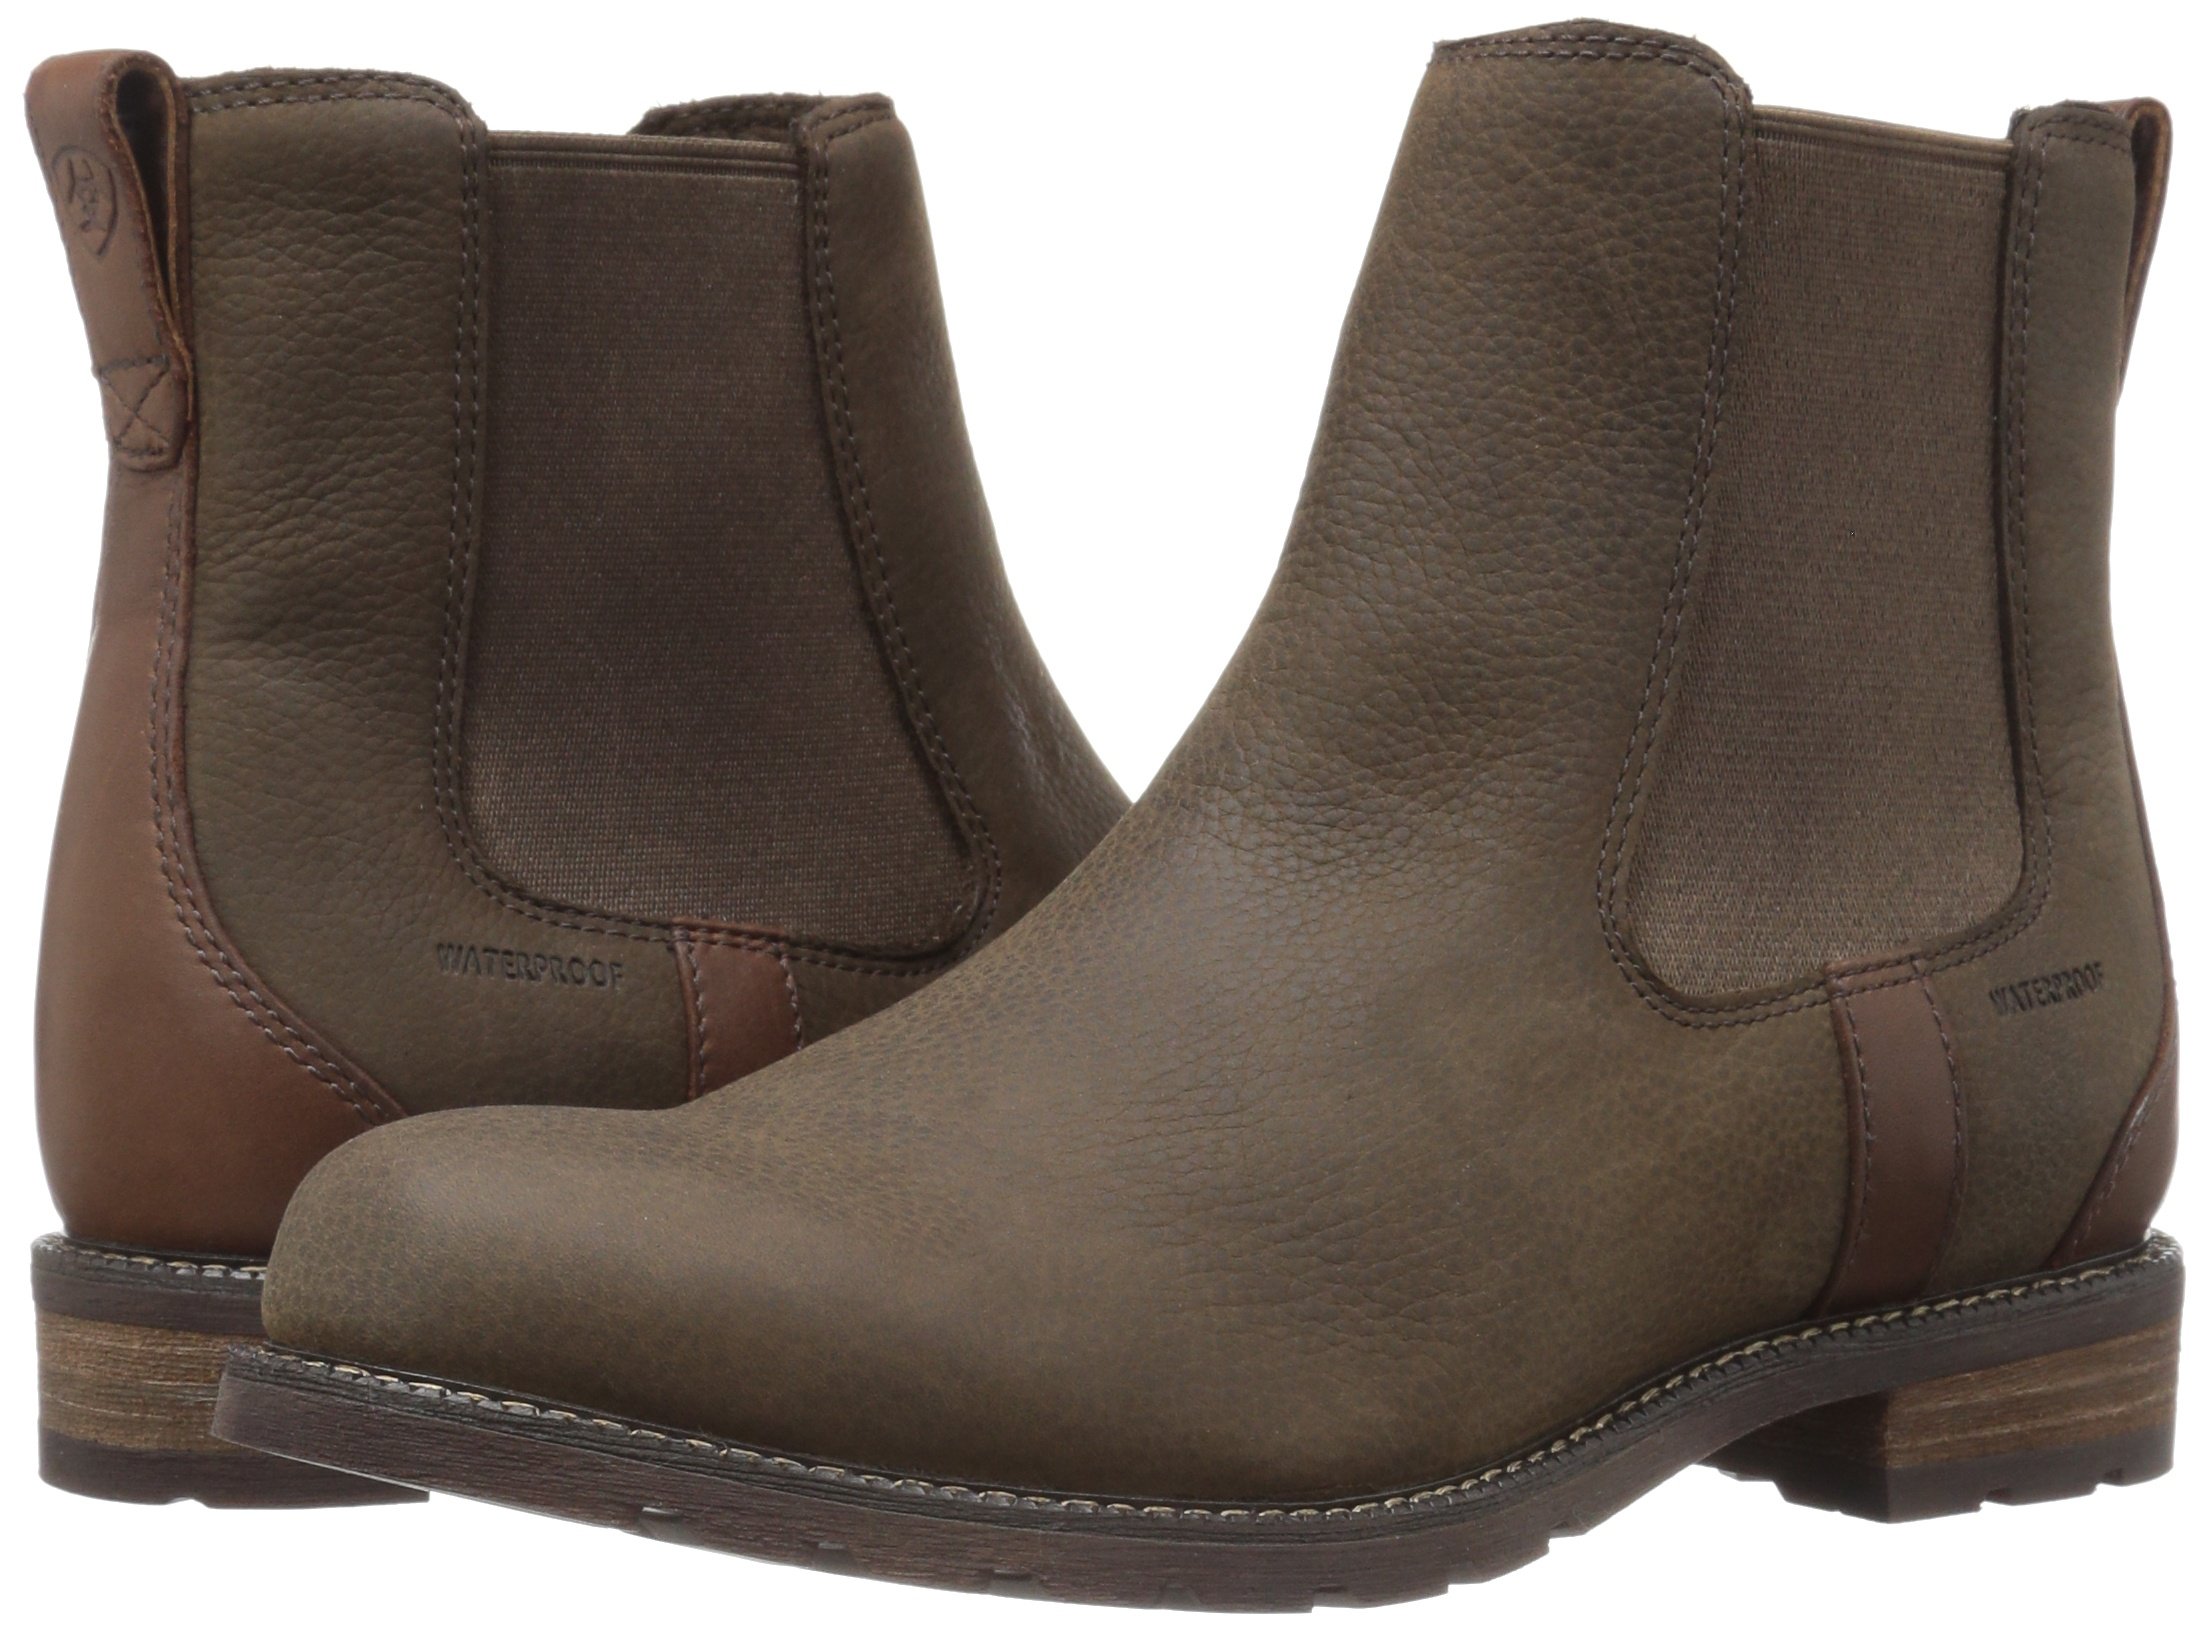 Ariat Wexford Waterproof Boots - Women’s Leather Country Boot